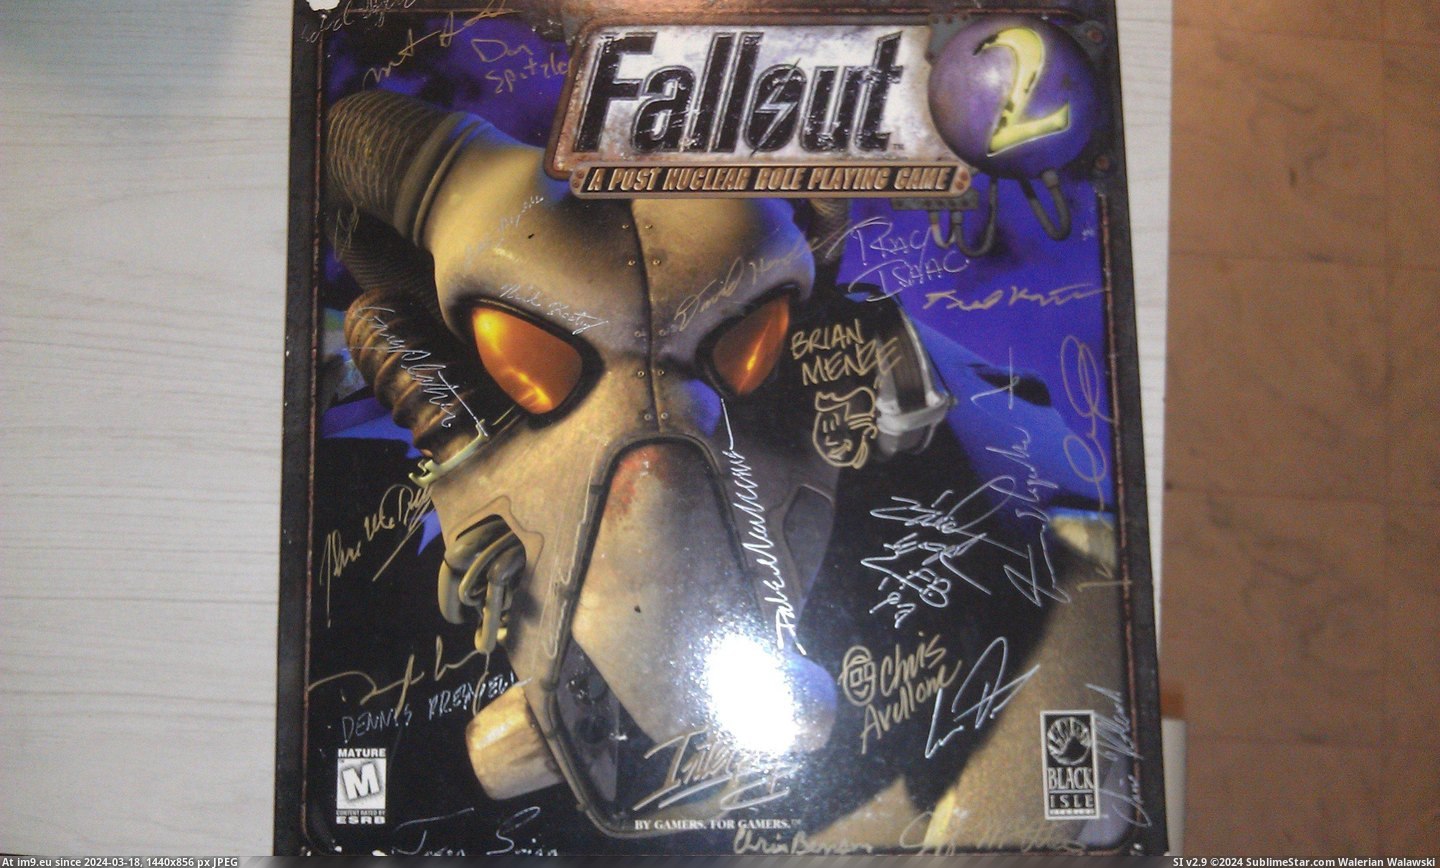 #Gaming #Out #Team #Contest #Development #Dug #Won #Fallout #Signed [Gaming] Dug this out. My copy of Fallout 2 signed by the development team that I won in a contest. Pic. (Изображение из альбом My r/GAMING favs))